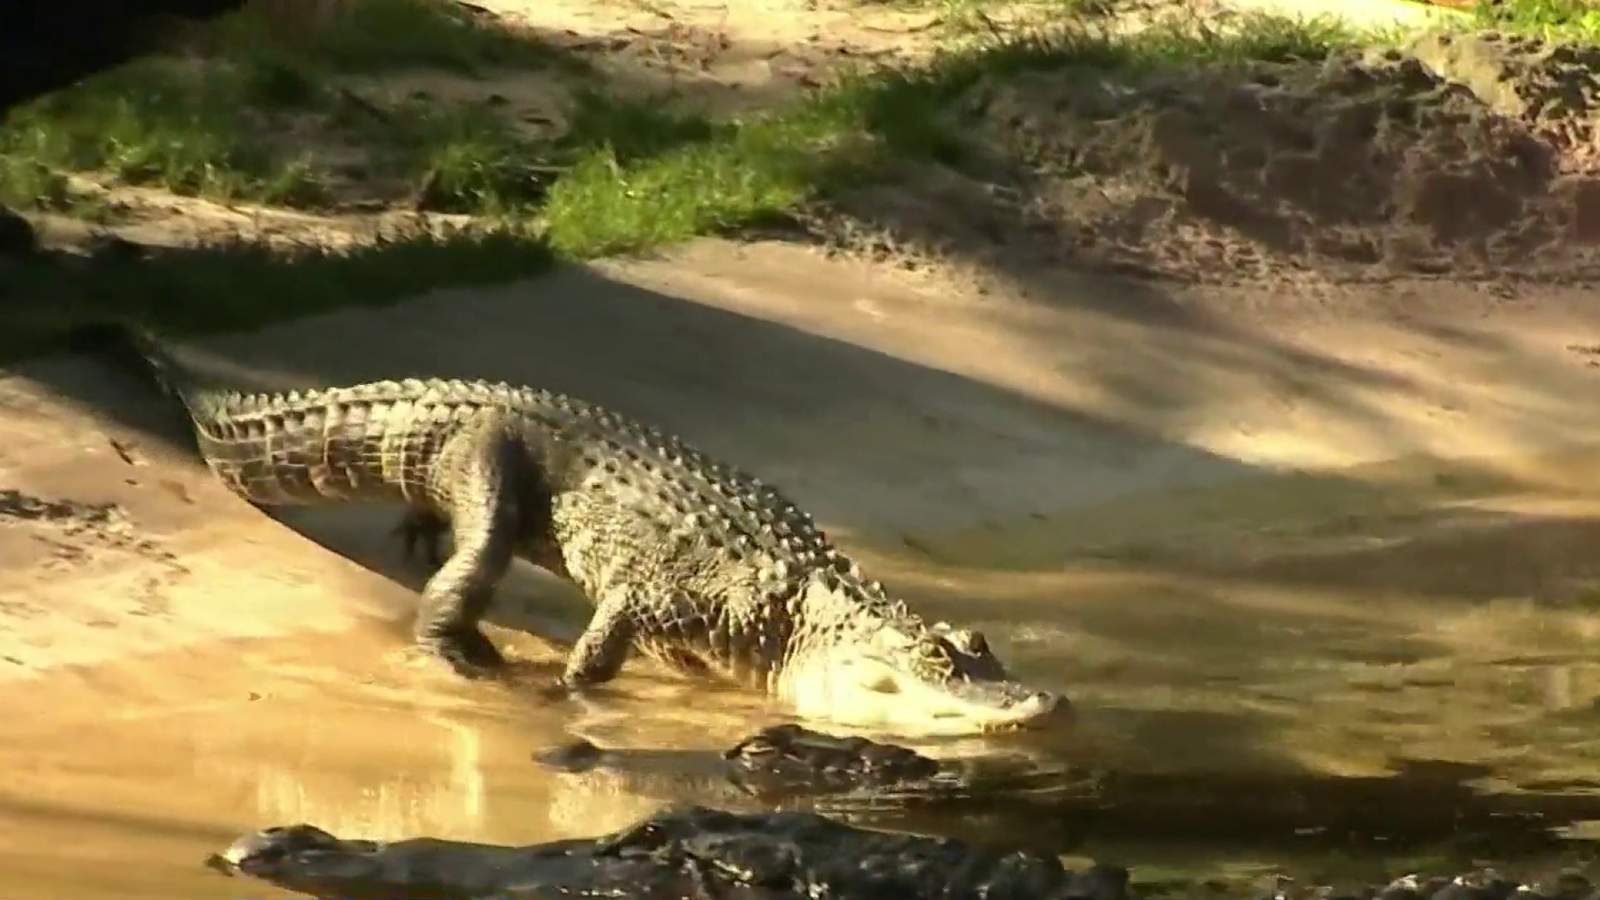 Alligators rescued from Midwest find warm home in Central Florida